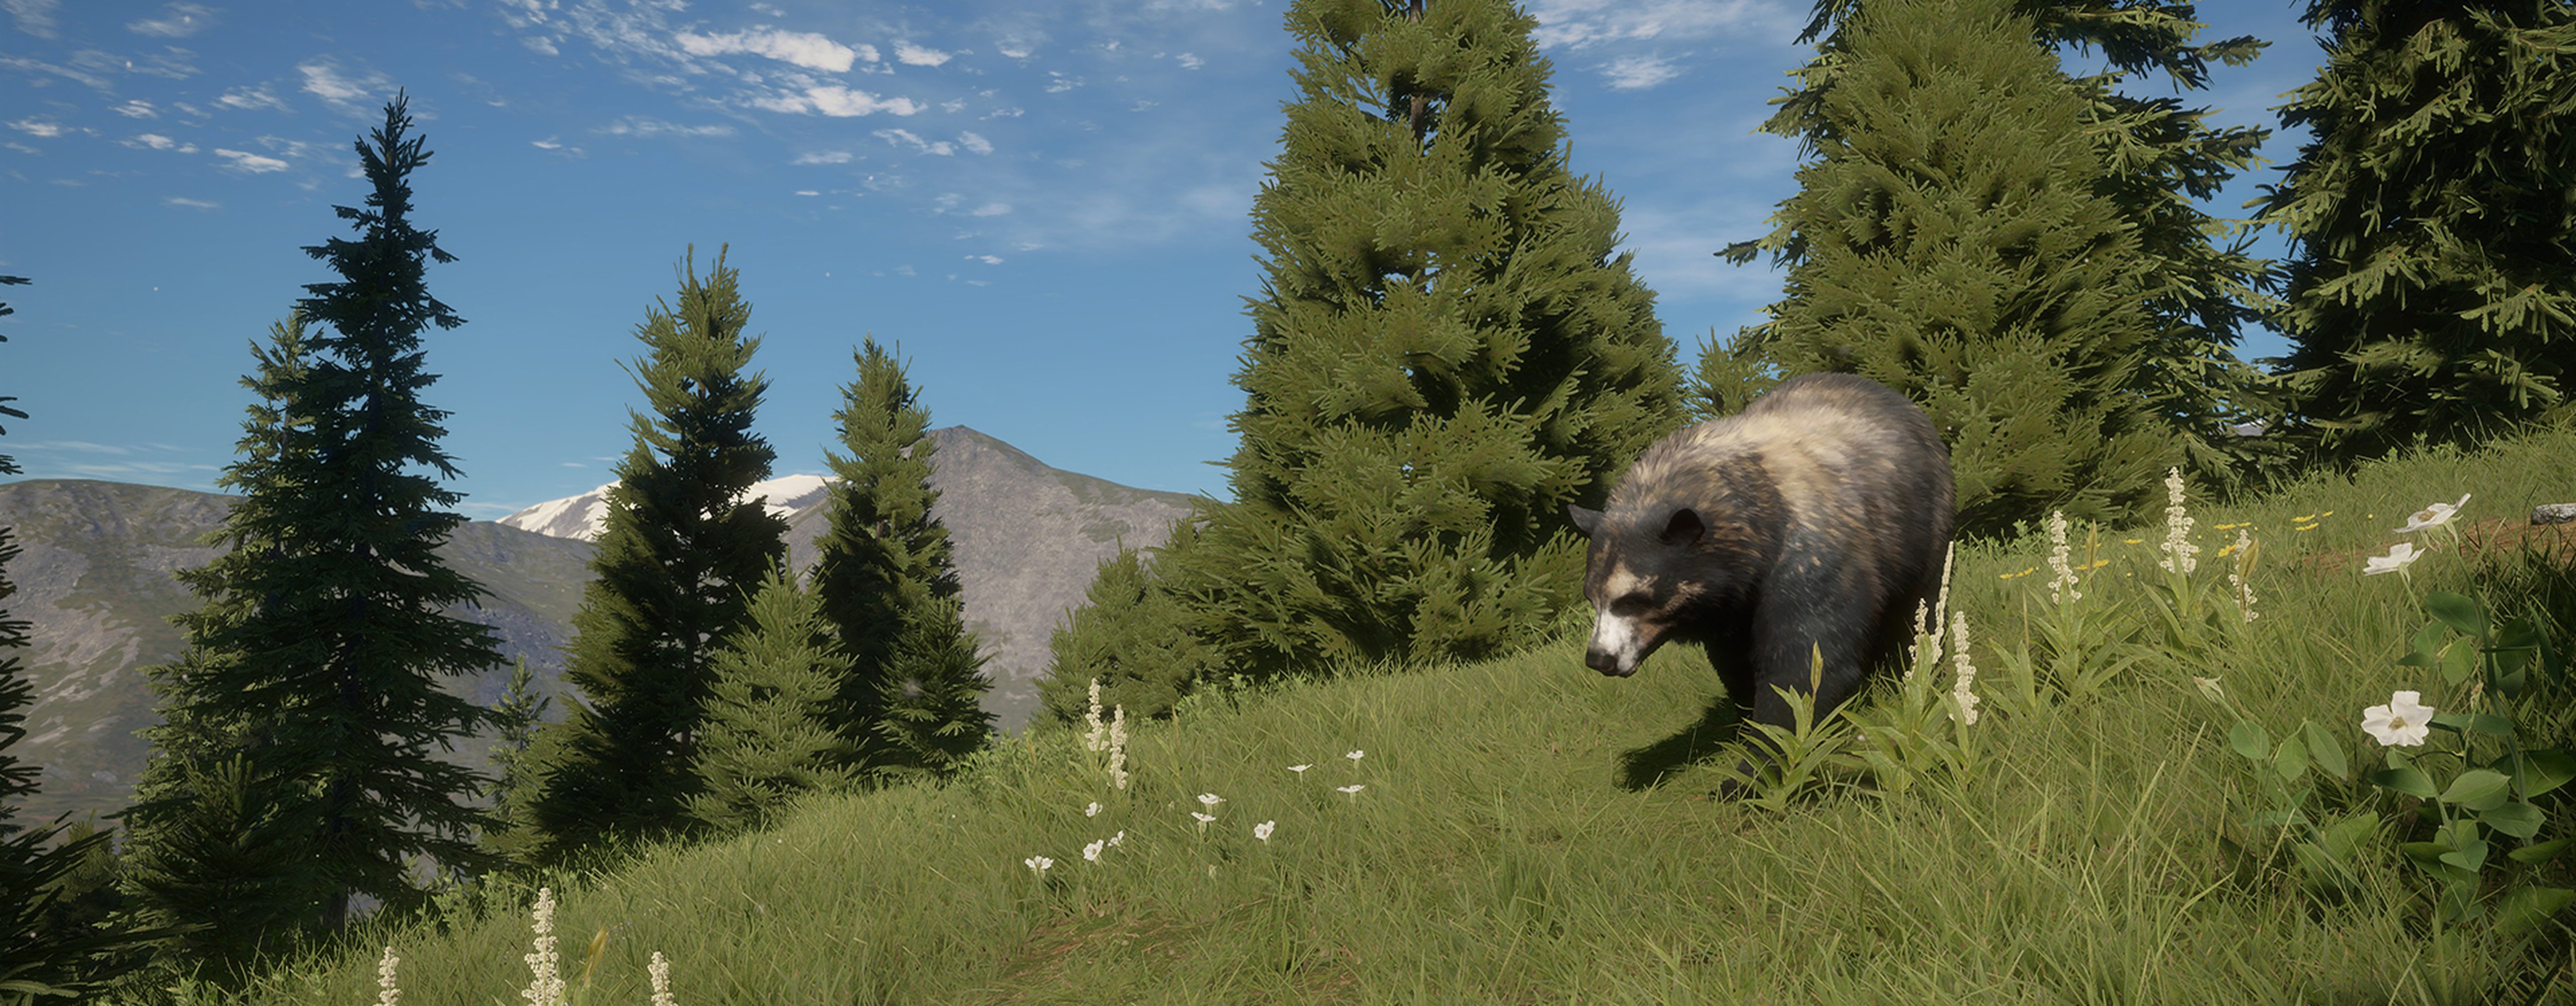 Screenshot of the Fabled Glacier Black Bear Great One roaming the hills of Silver Ridge Peaks Reserve.